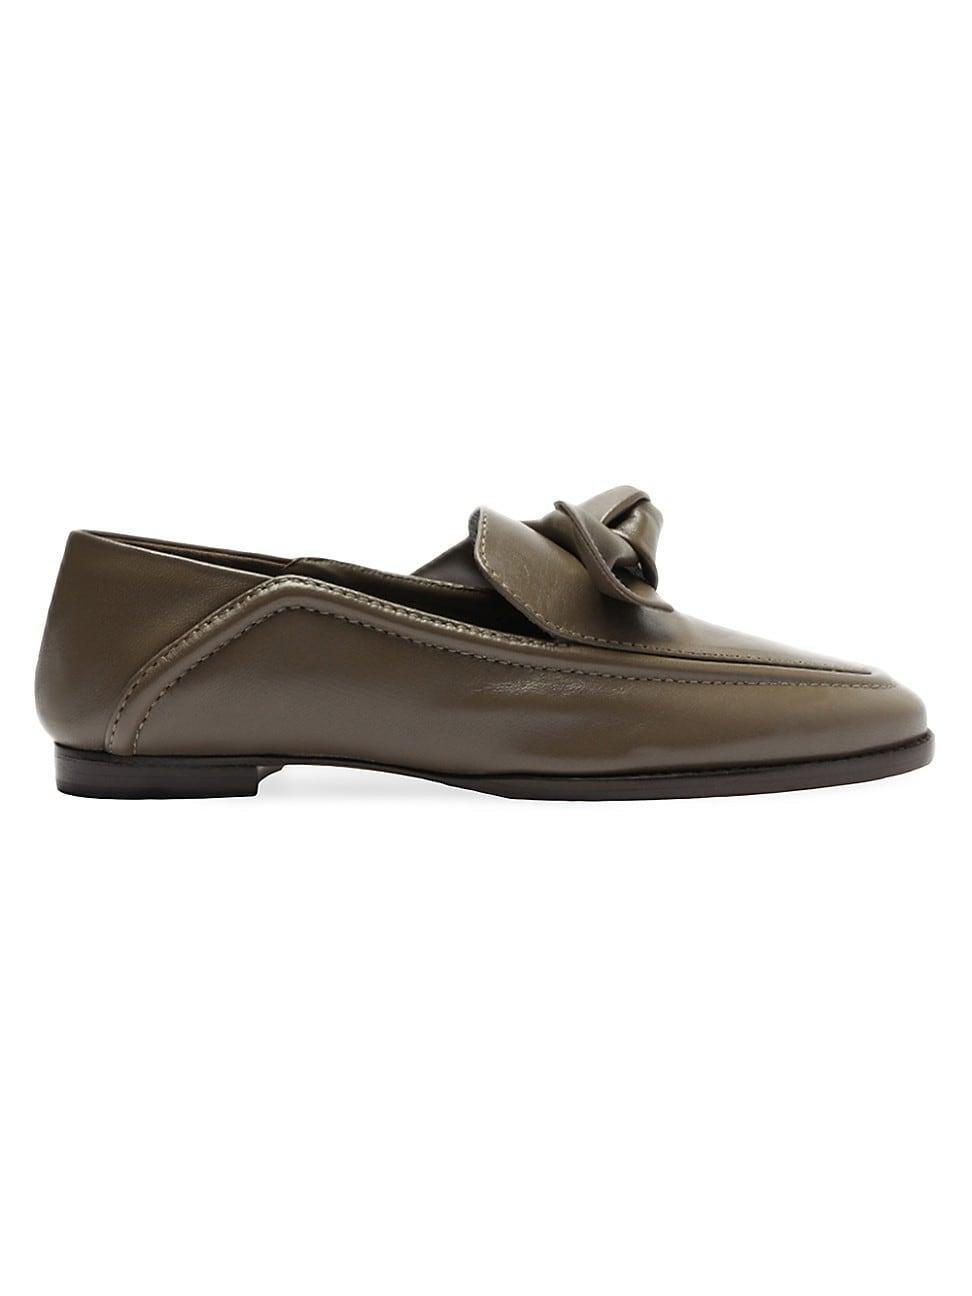 Womens Soft Maxi Clarita Leather Loafers Product Image